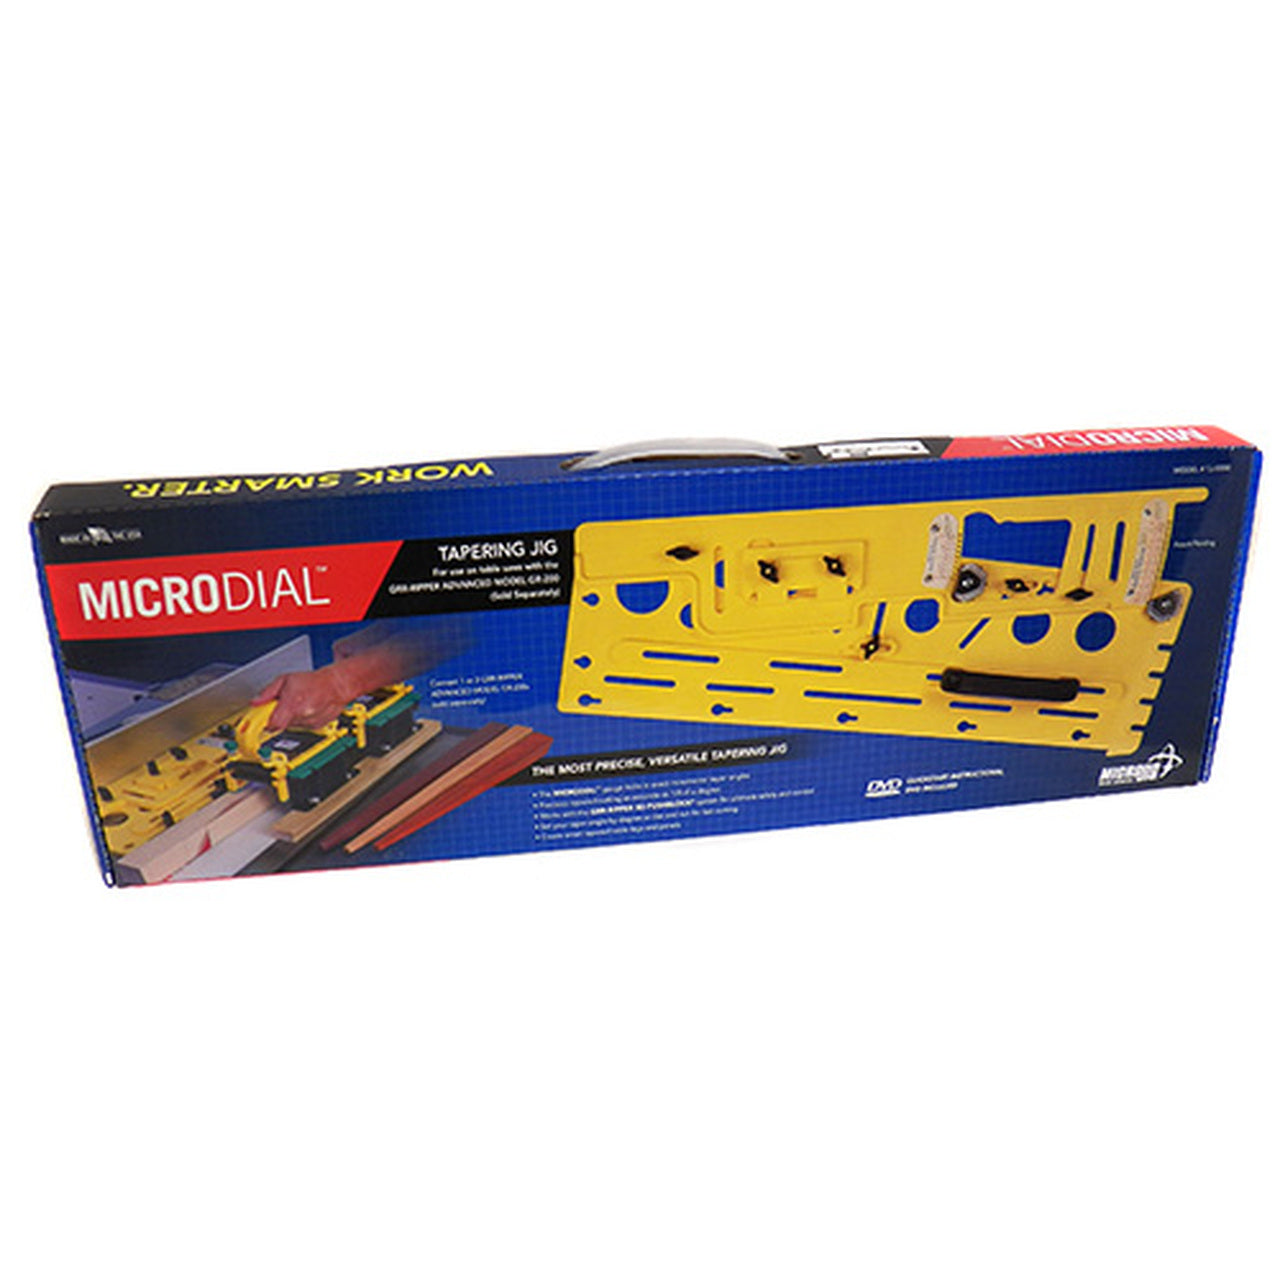 Microjig Microdial Adjustable Tapering Jig TJ-5000 Power Tool Services